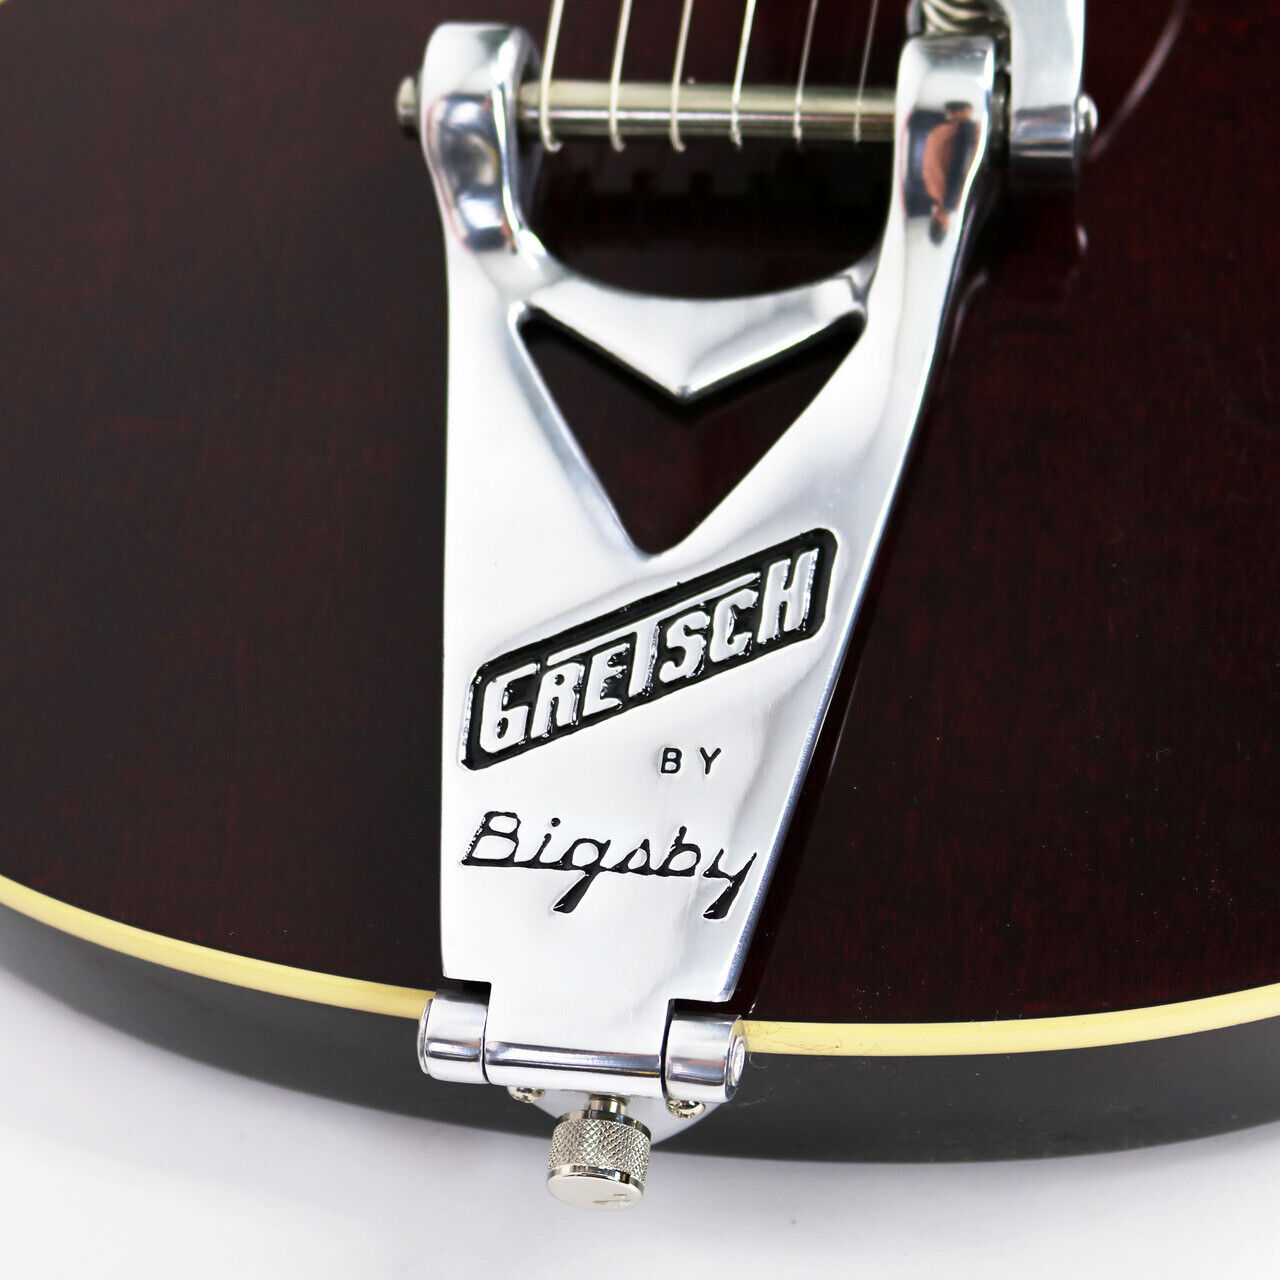 Gretsch G6119T-62 Vintage Select Edition 1962 Chet Atkins Tennessee Rose - Dark Cherry Stain